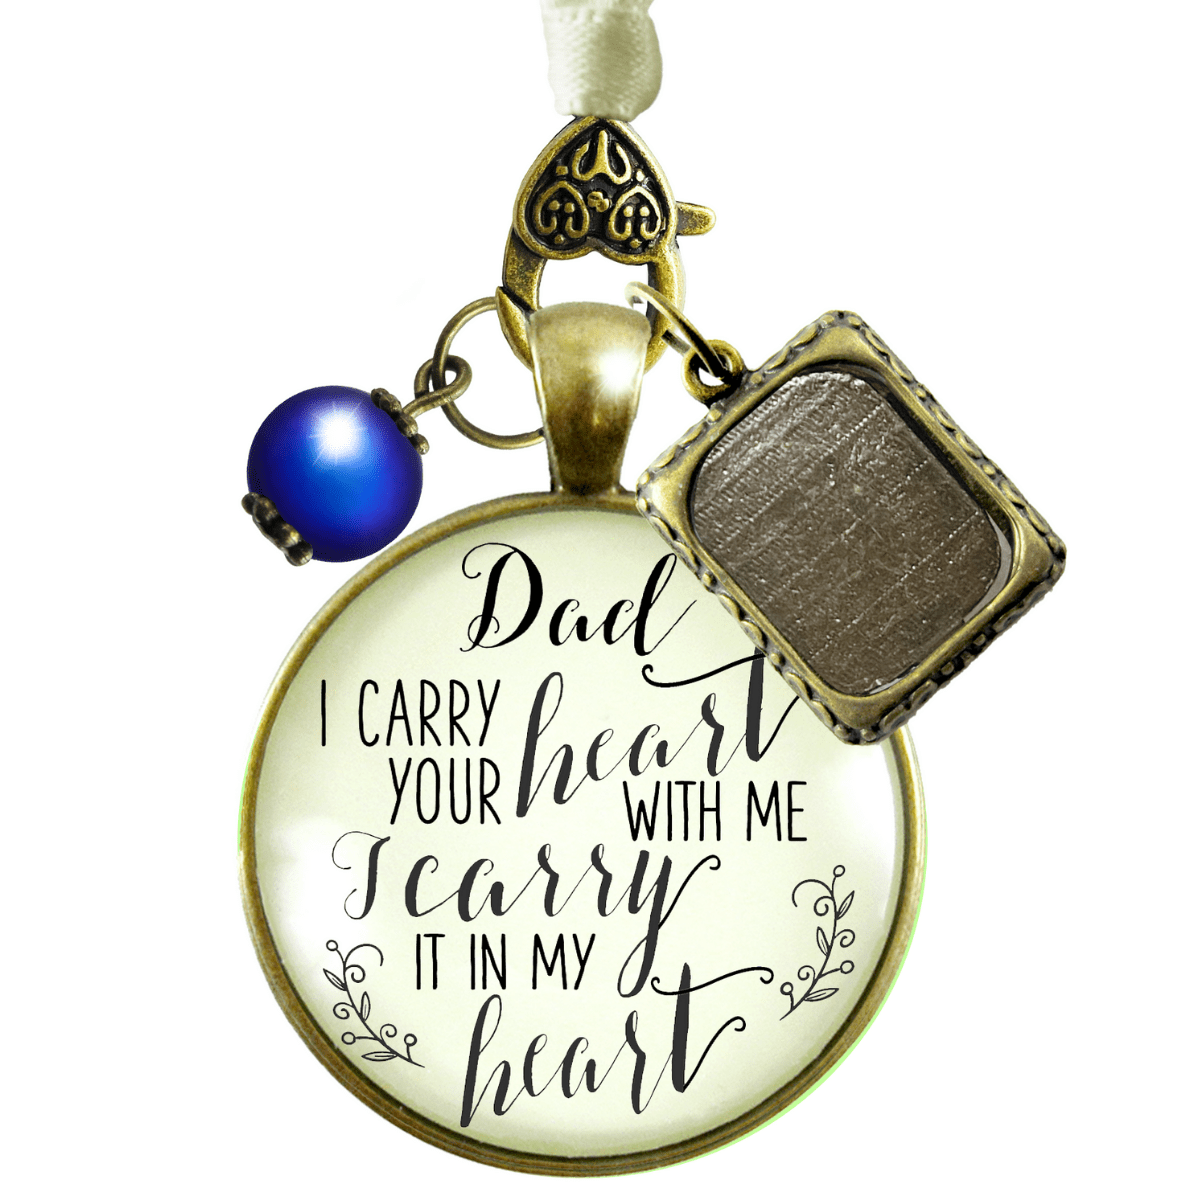 Dad I Carry Your Heart With Me I Carry It In My Heart - BRONZE - CREAM - BLUE BEAD